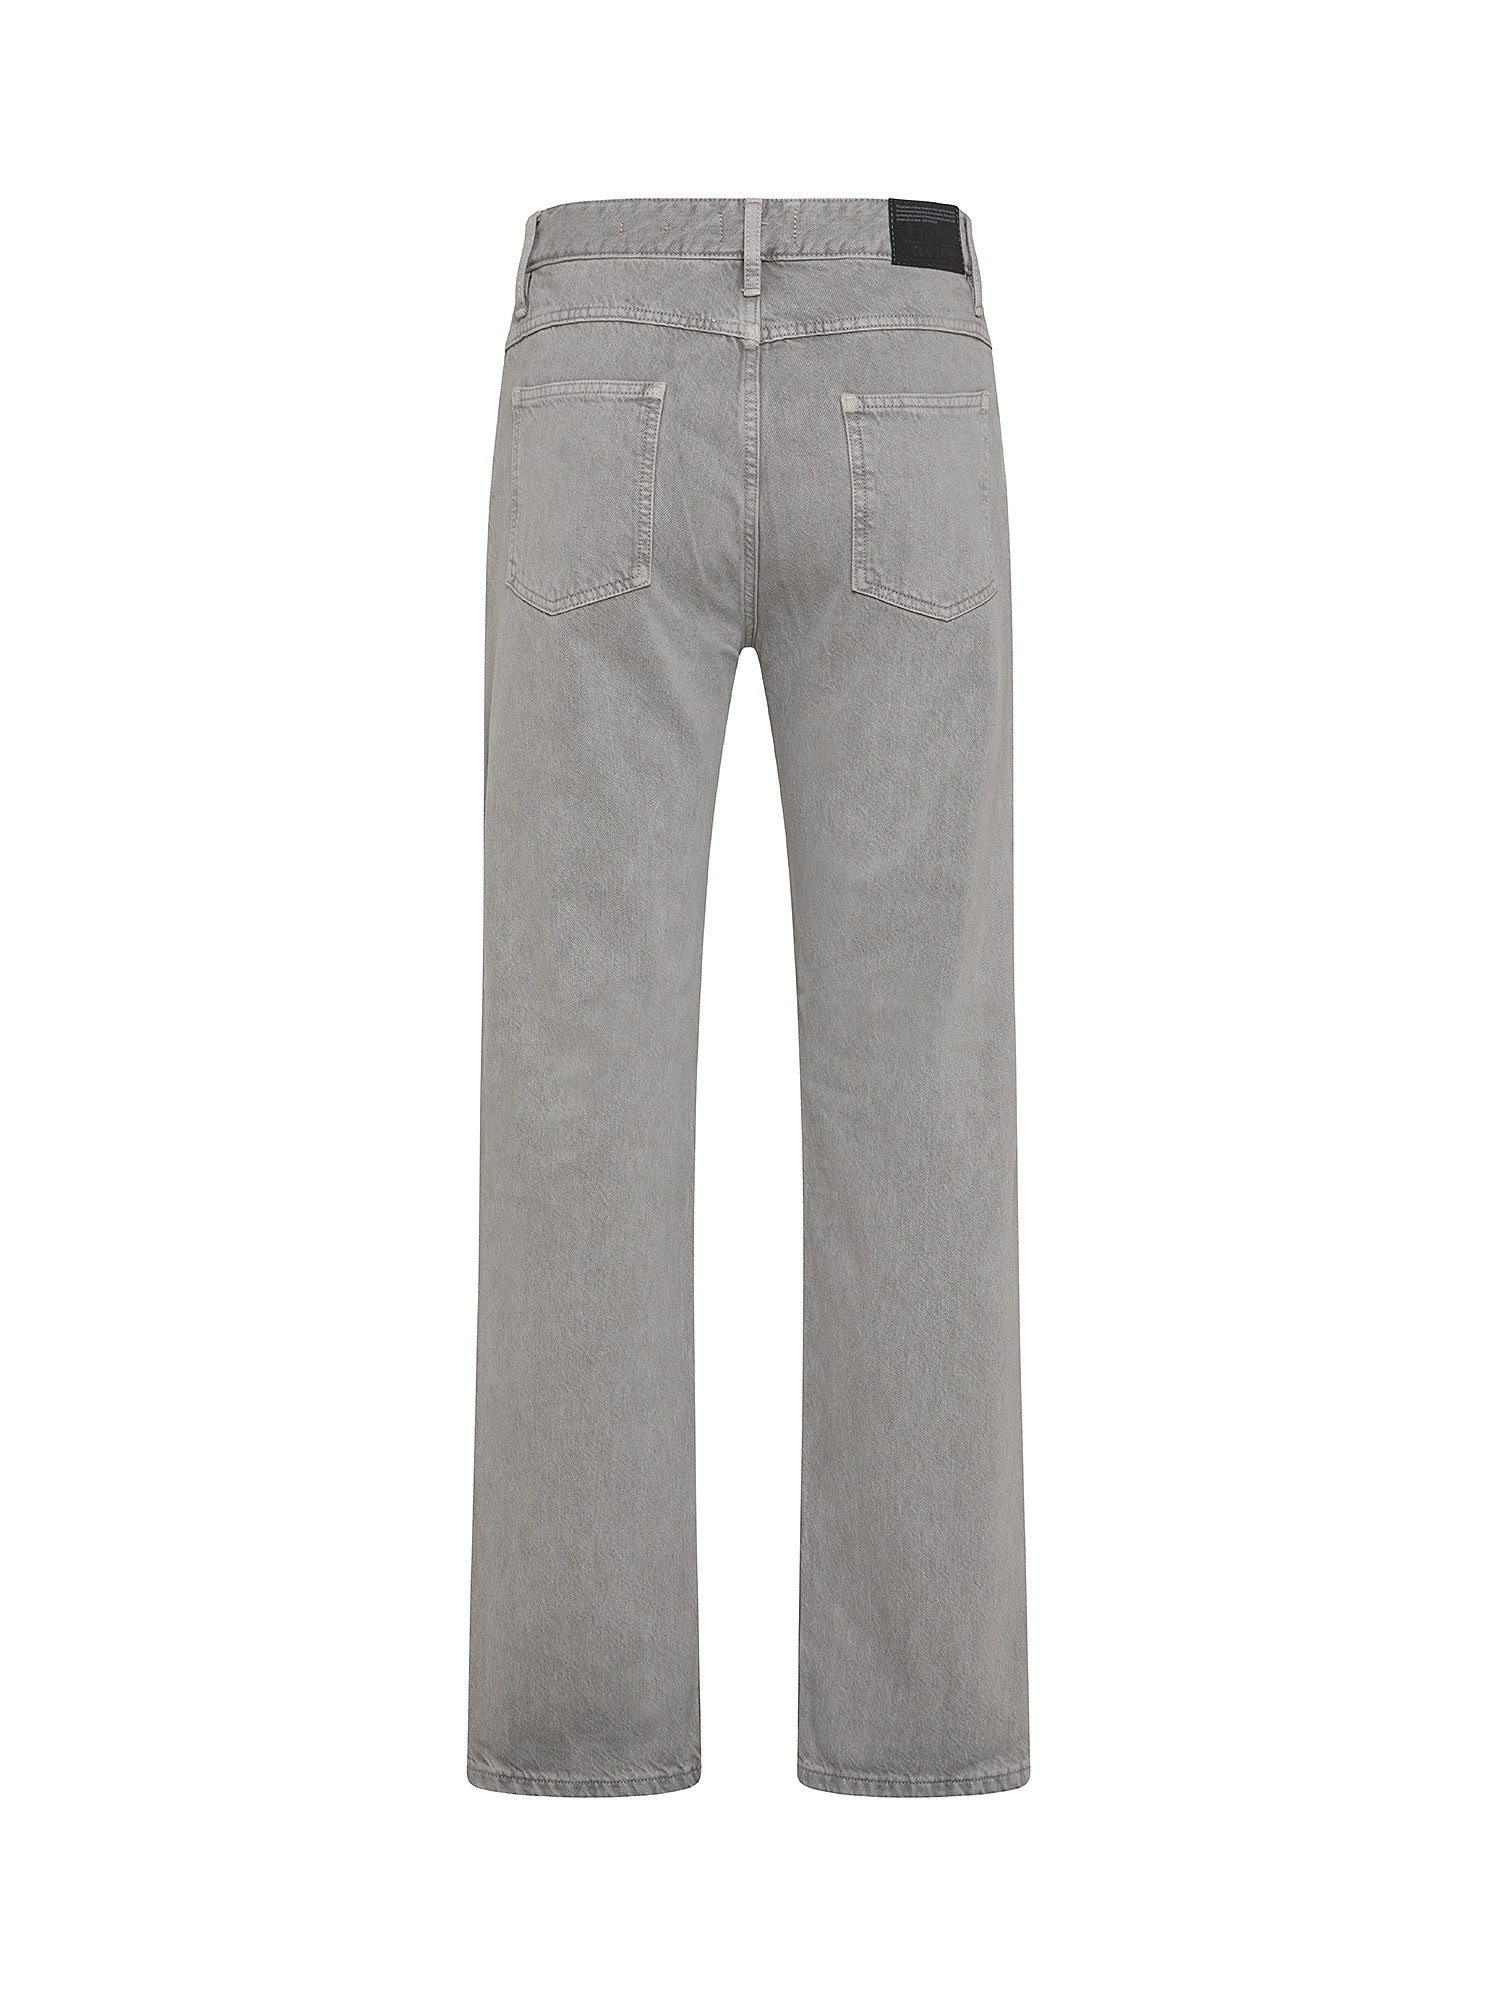 Jeans dritti, Grigio fumo, large image number 1